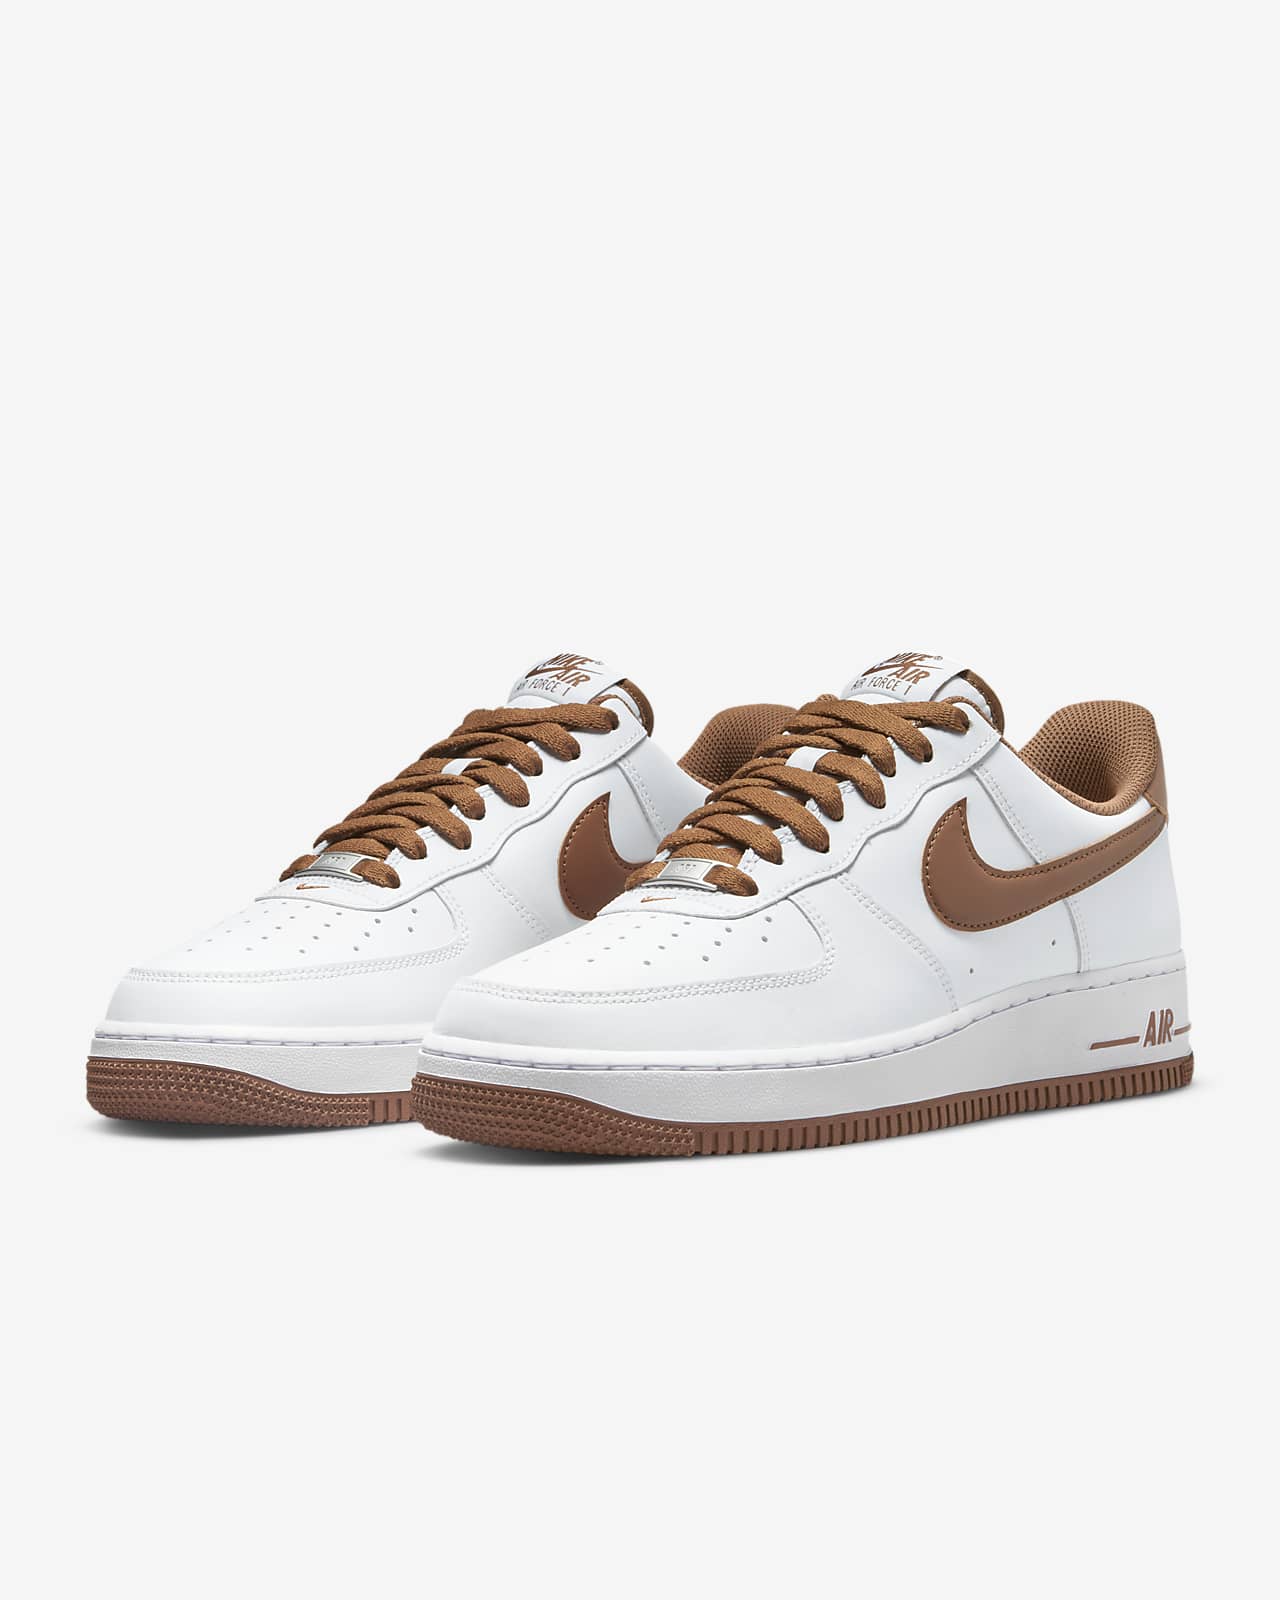 Nike Air Force air force 1 brown and white 1 '07 Men's Shoes